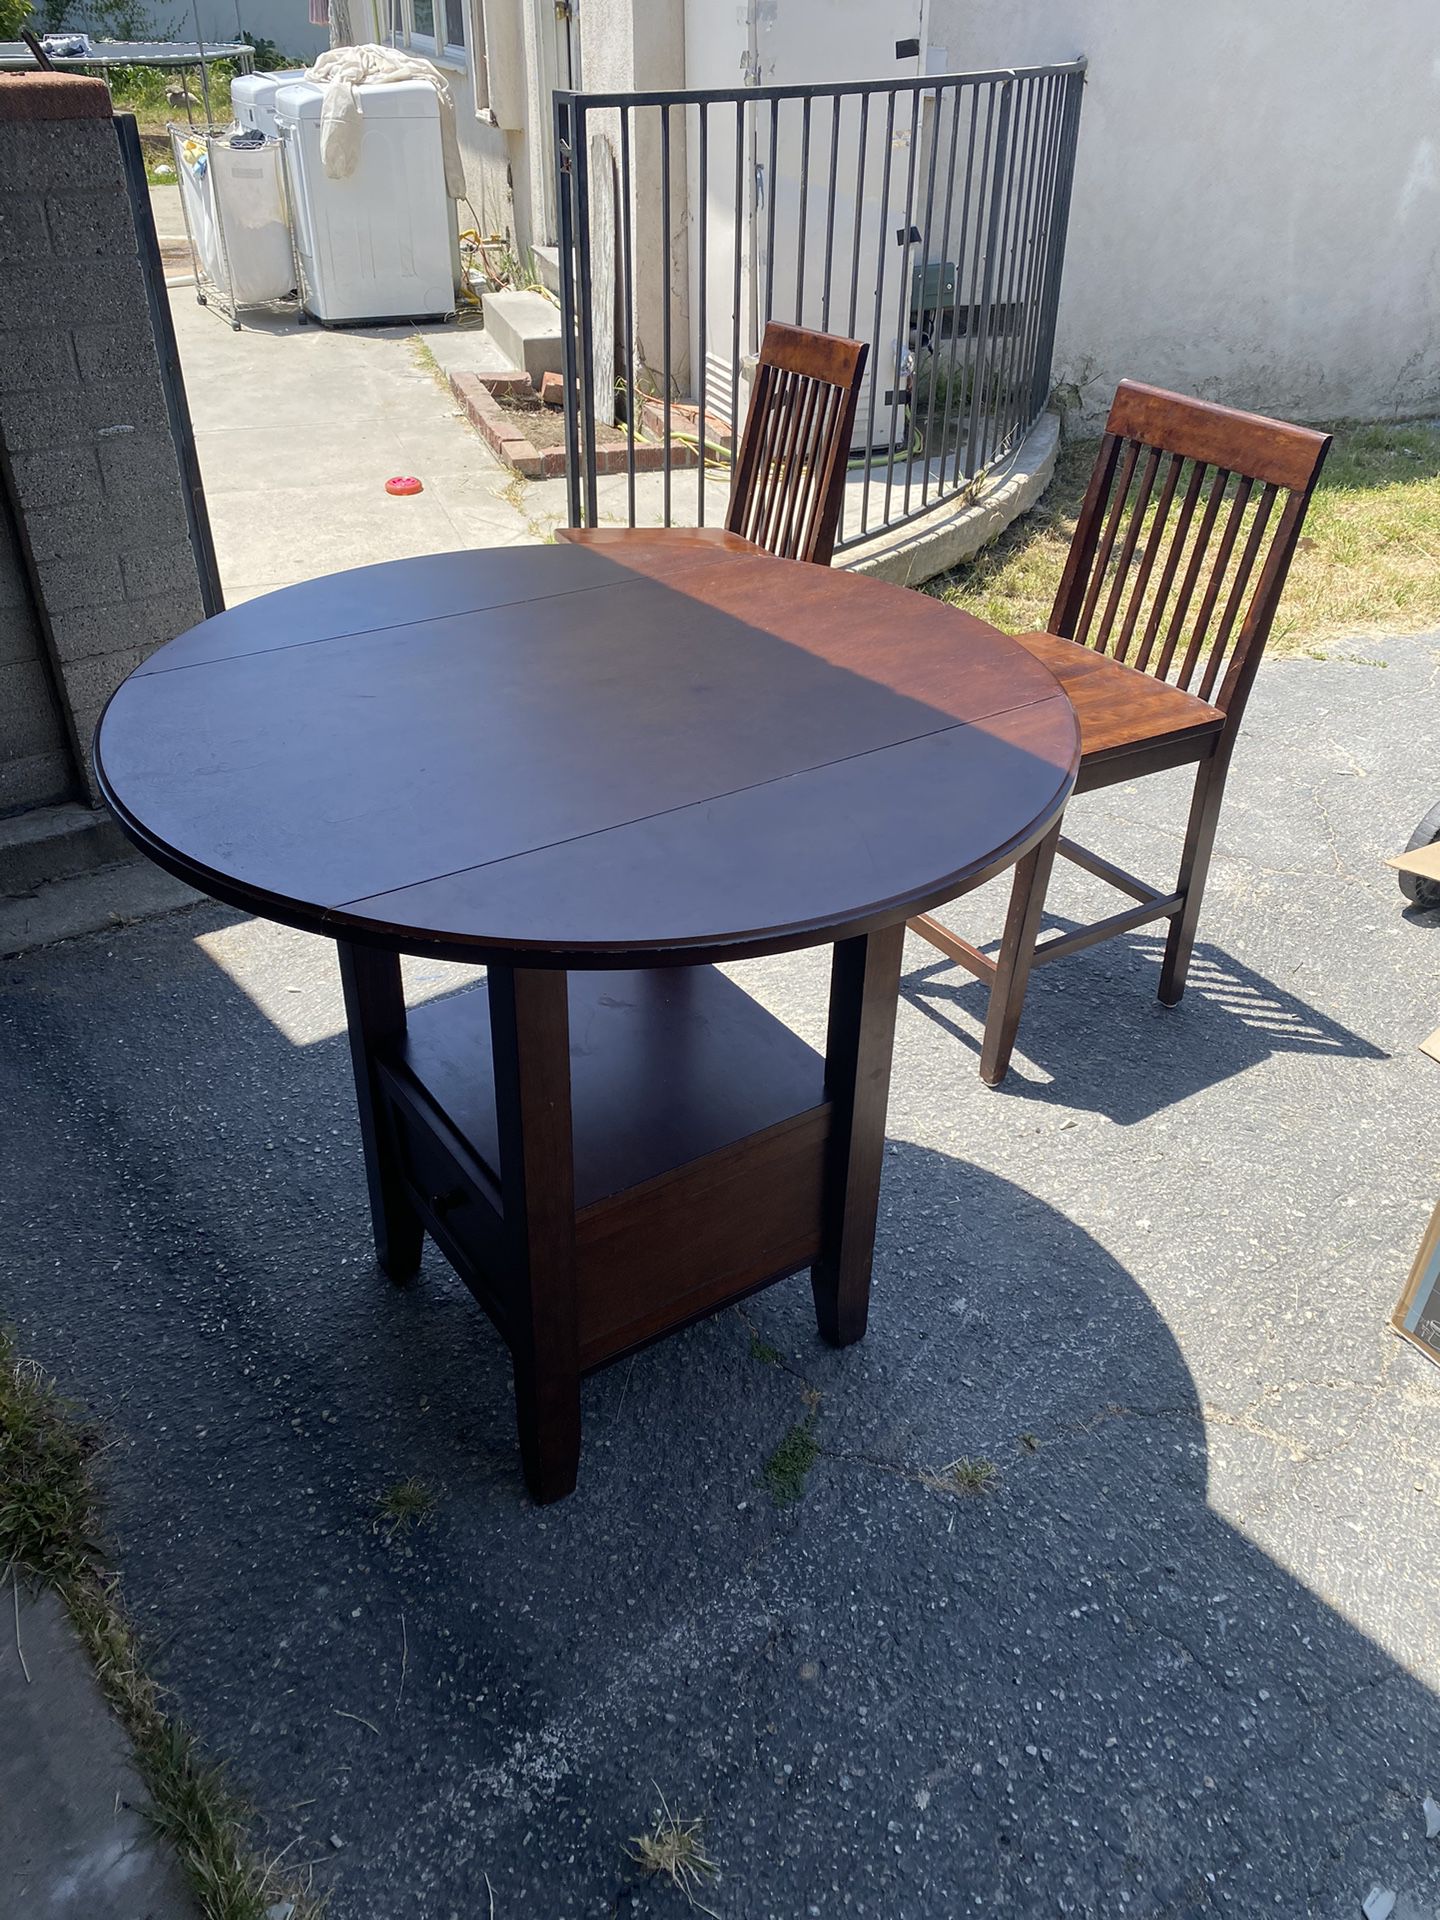 Table With 2 Chairs $25 Or Best Offer